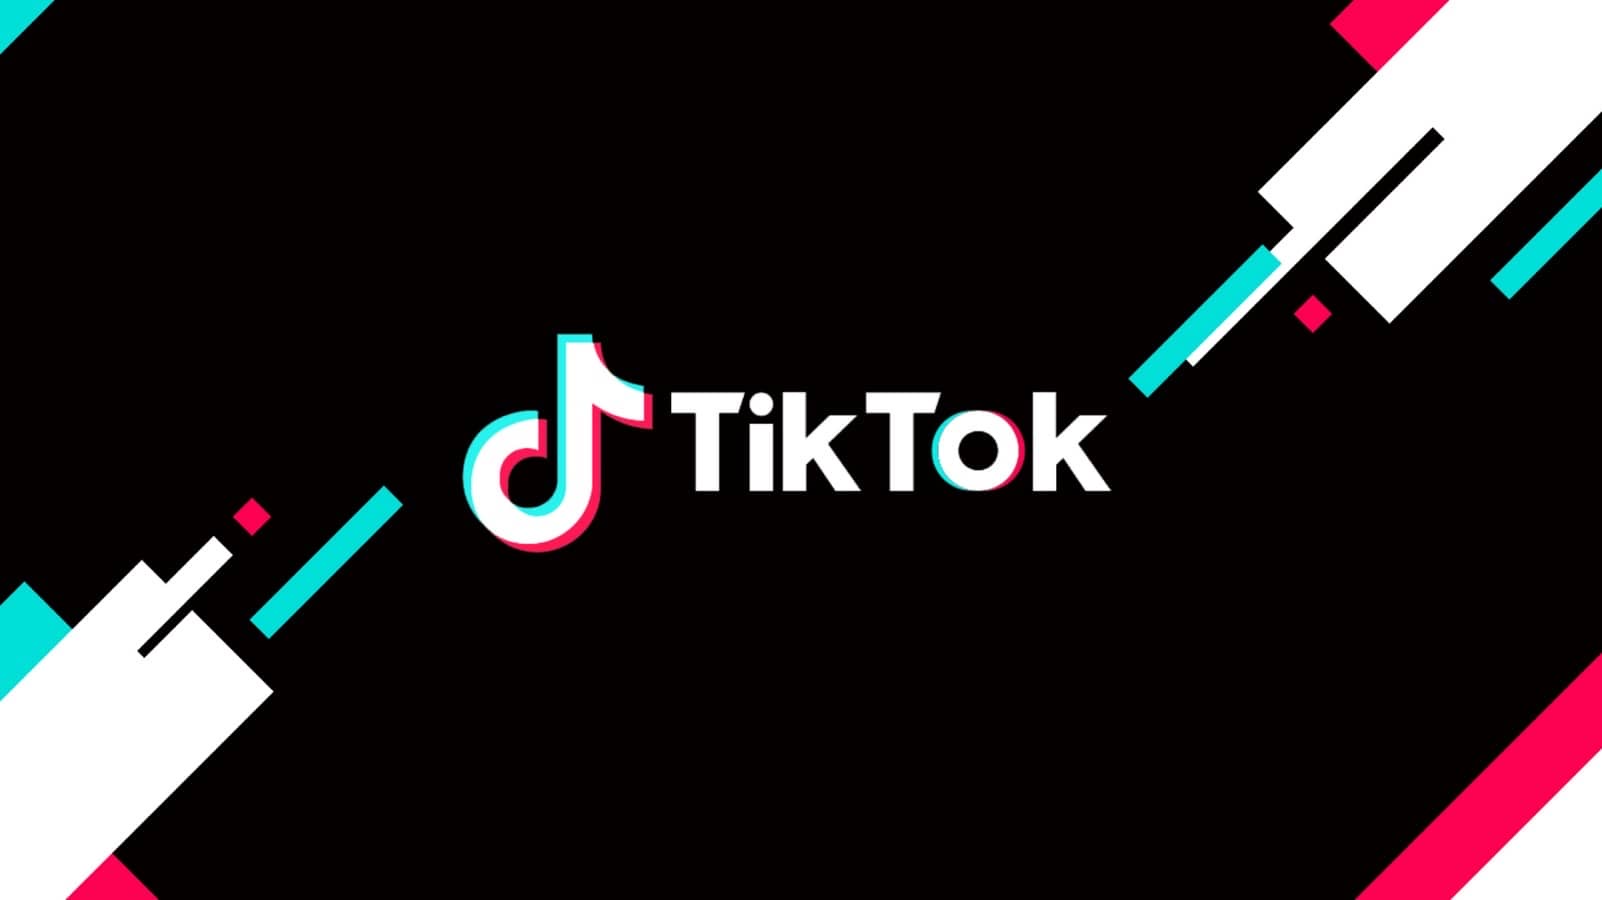 How to earn free gold on kogama with tiktok and kwai